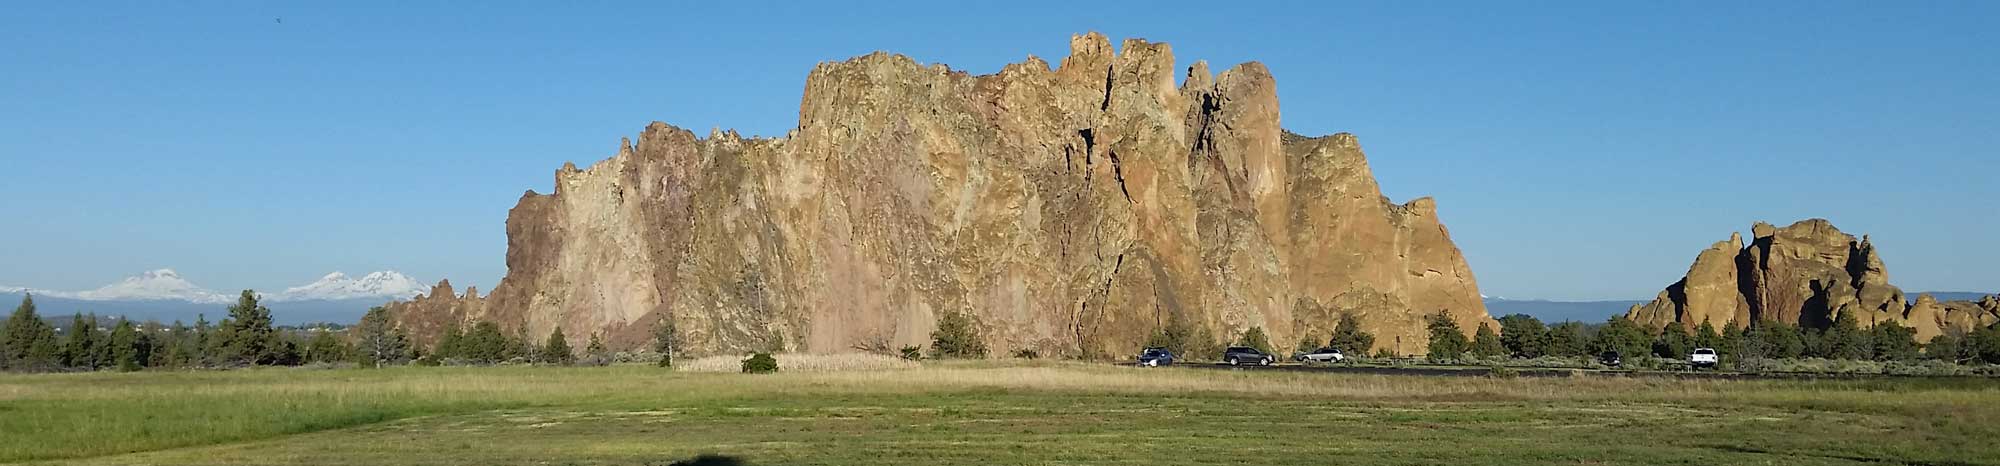 Smith Rock overview